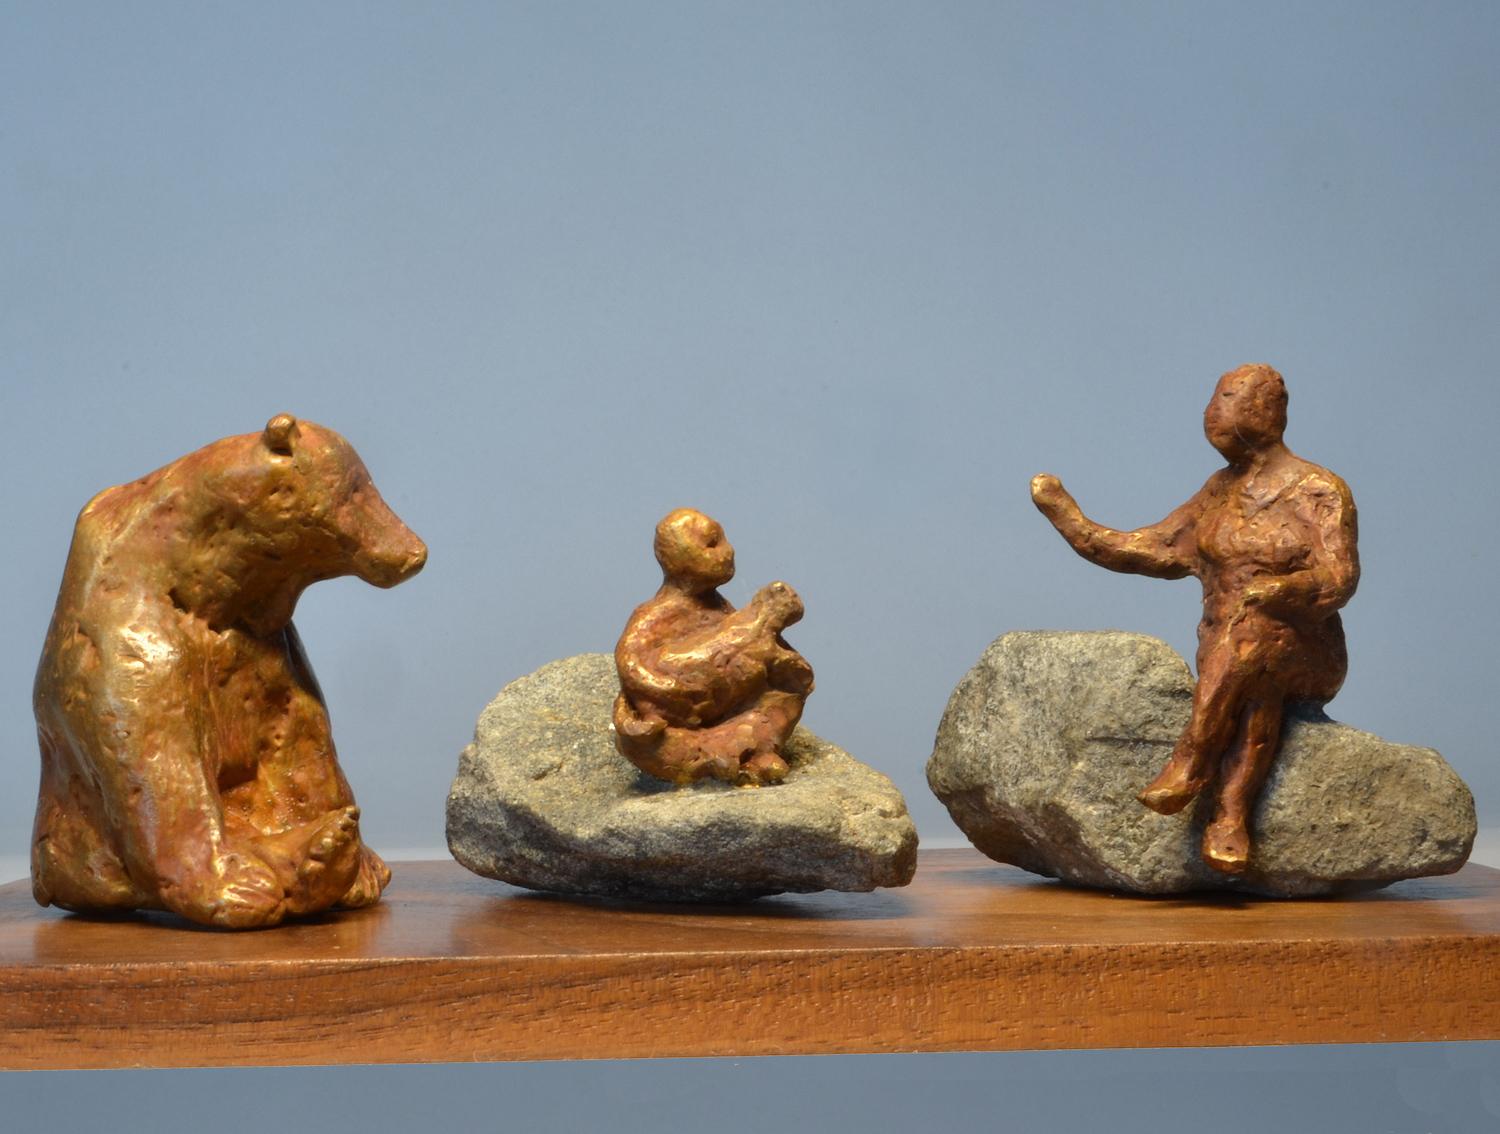 Noa Bornstein Figurative Sculpture - "Once Upon a Time with Bear" interactive bronze figures 